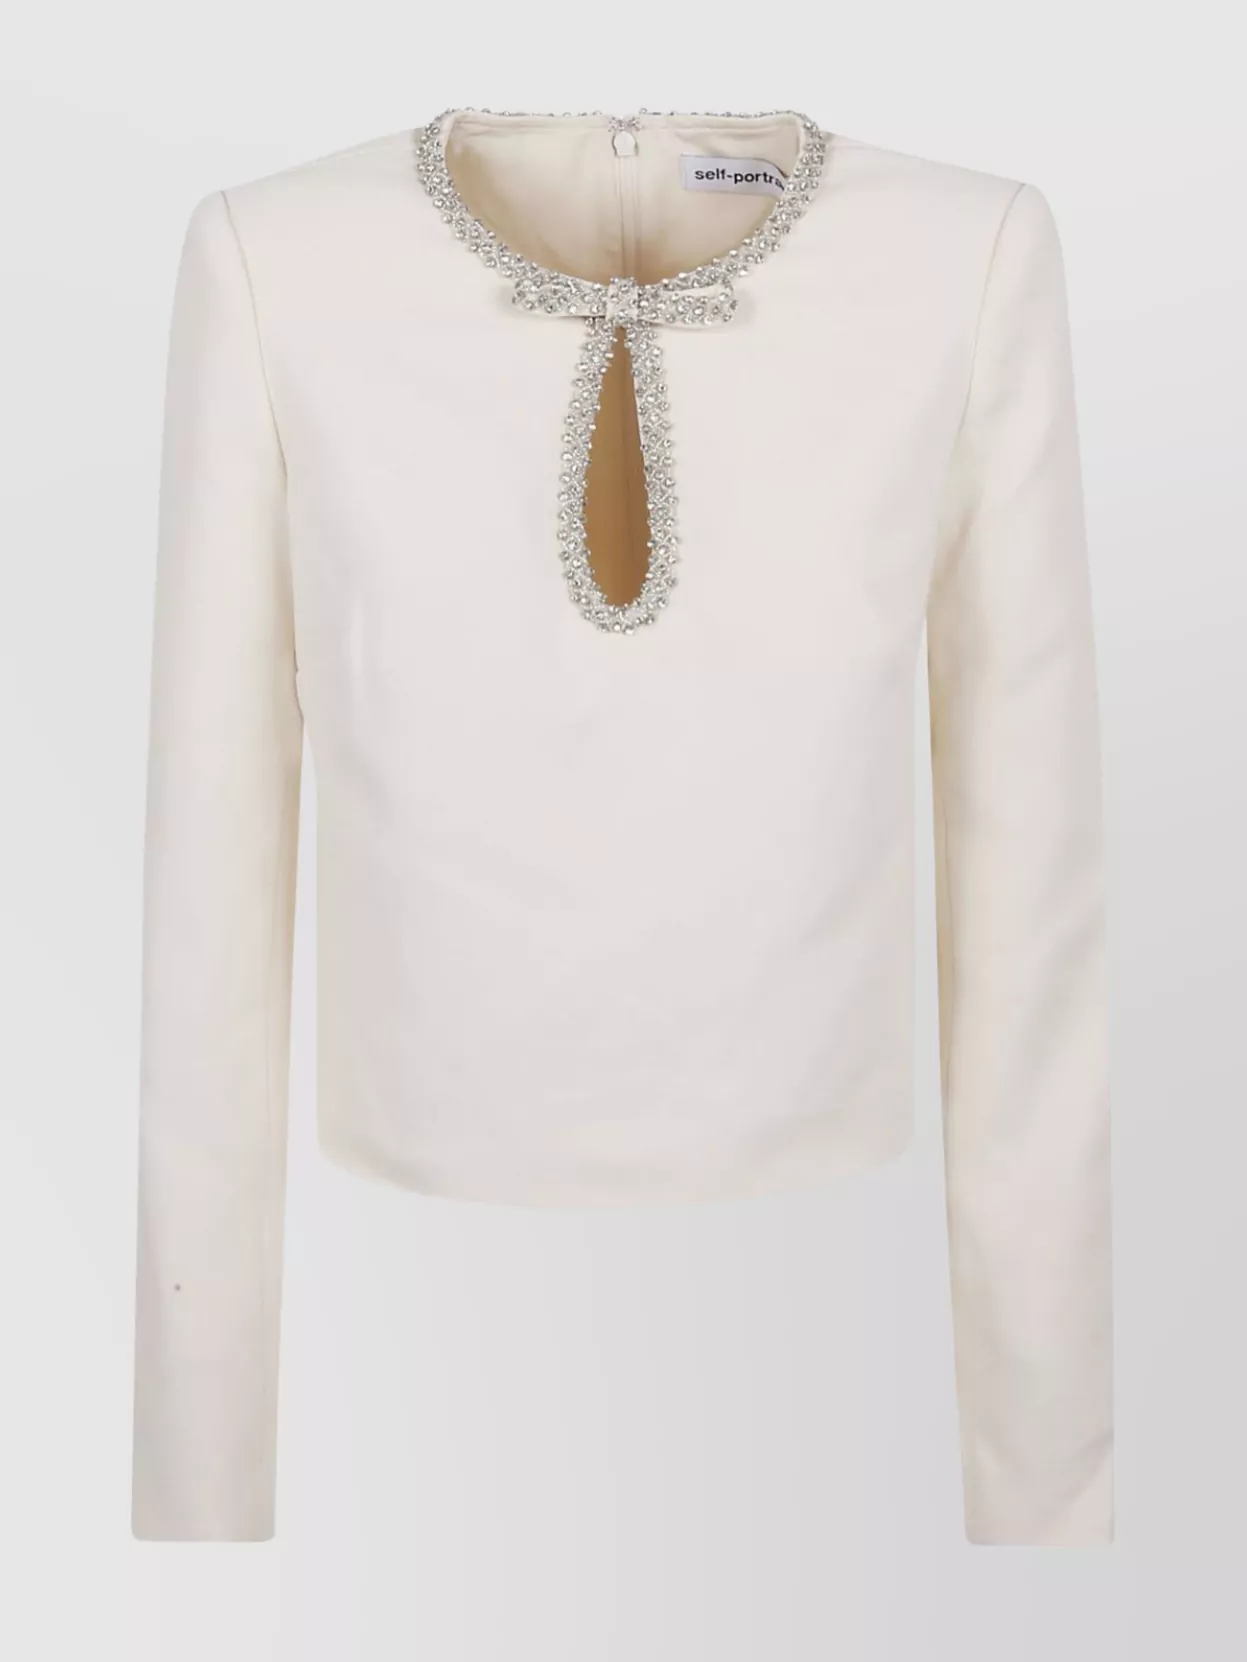 SELF-PORTRAIT DIAMANTE EMBELLISHED CROPPED TOP